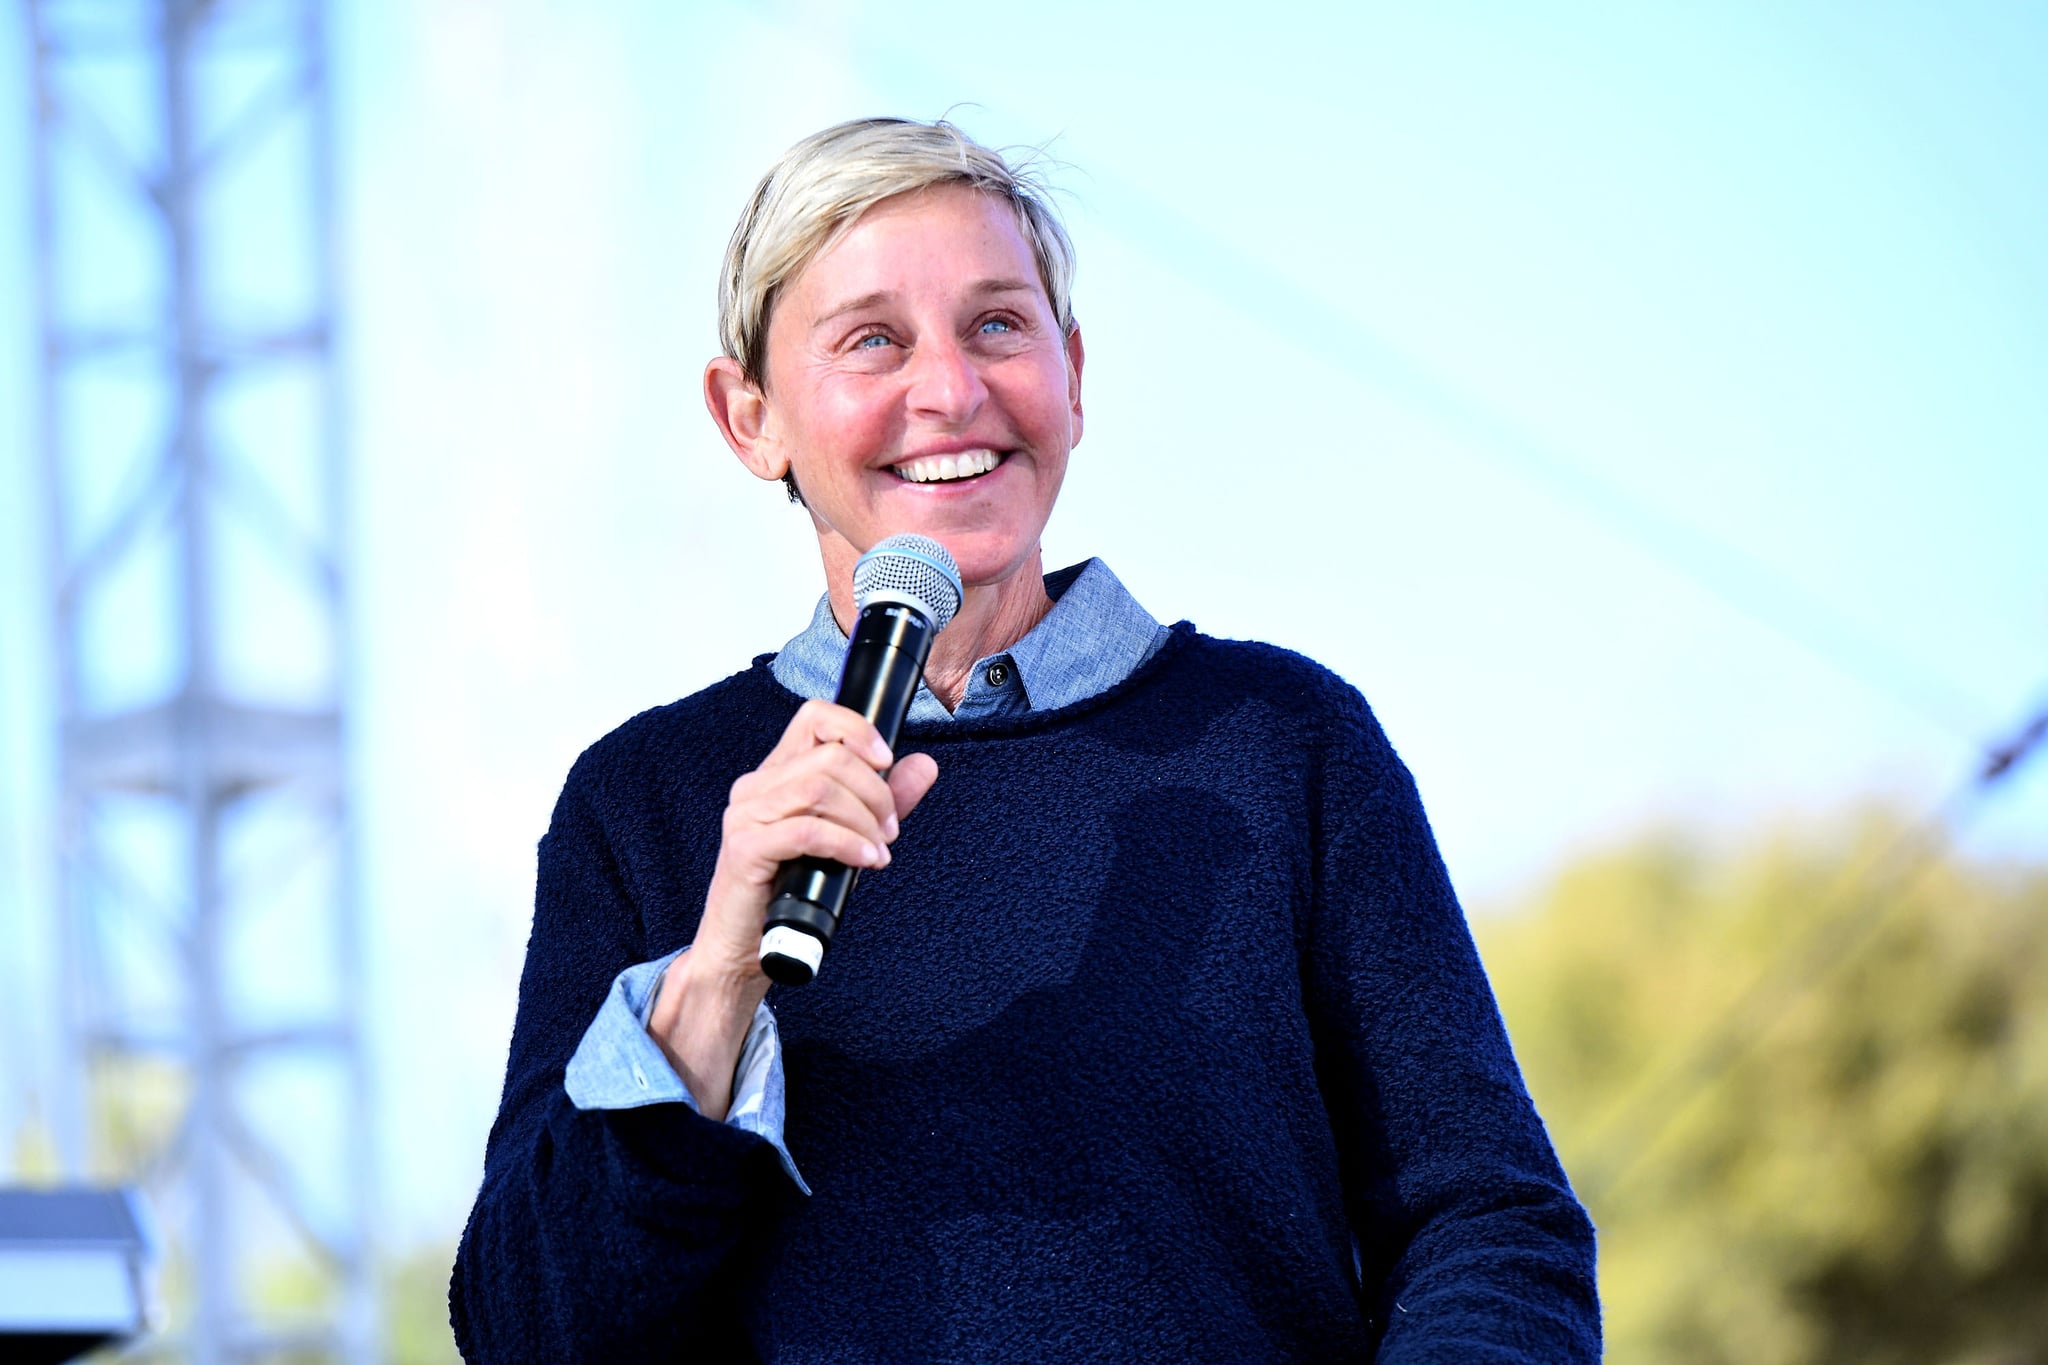 CARPINTERIA, CA - FEBRUARY 25:  TV personality Ellen DeGeneres performs onstage during the One 805 Kick Ash Bash benefiting First Responders at Bella Vista Ranch & Polo Club on February 25, 2018 in Carpinteria, California.  (Photo by Scott Dudelson/Getty Images)